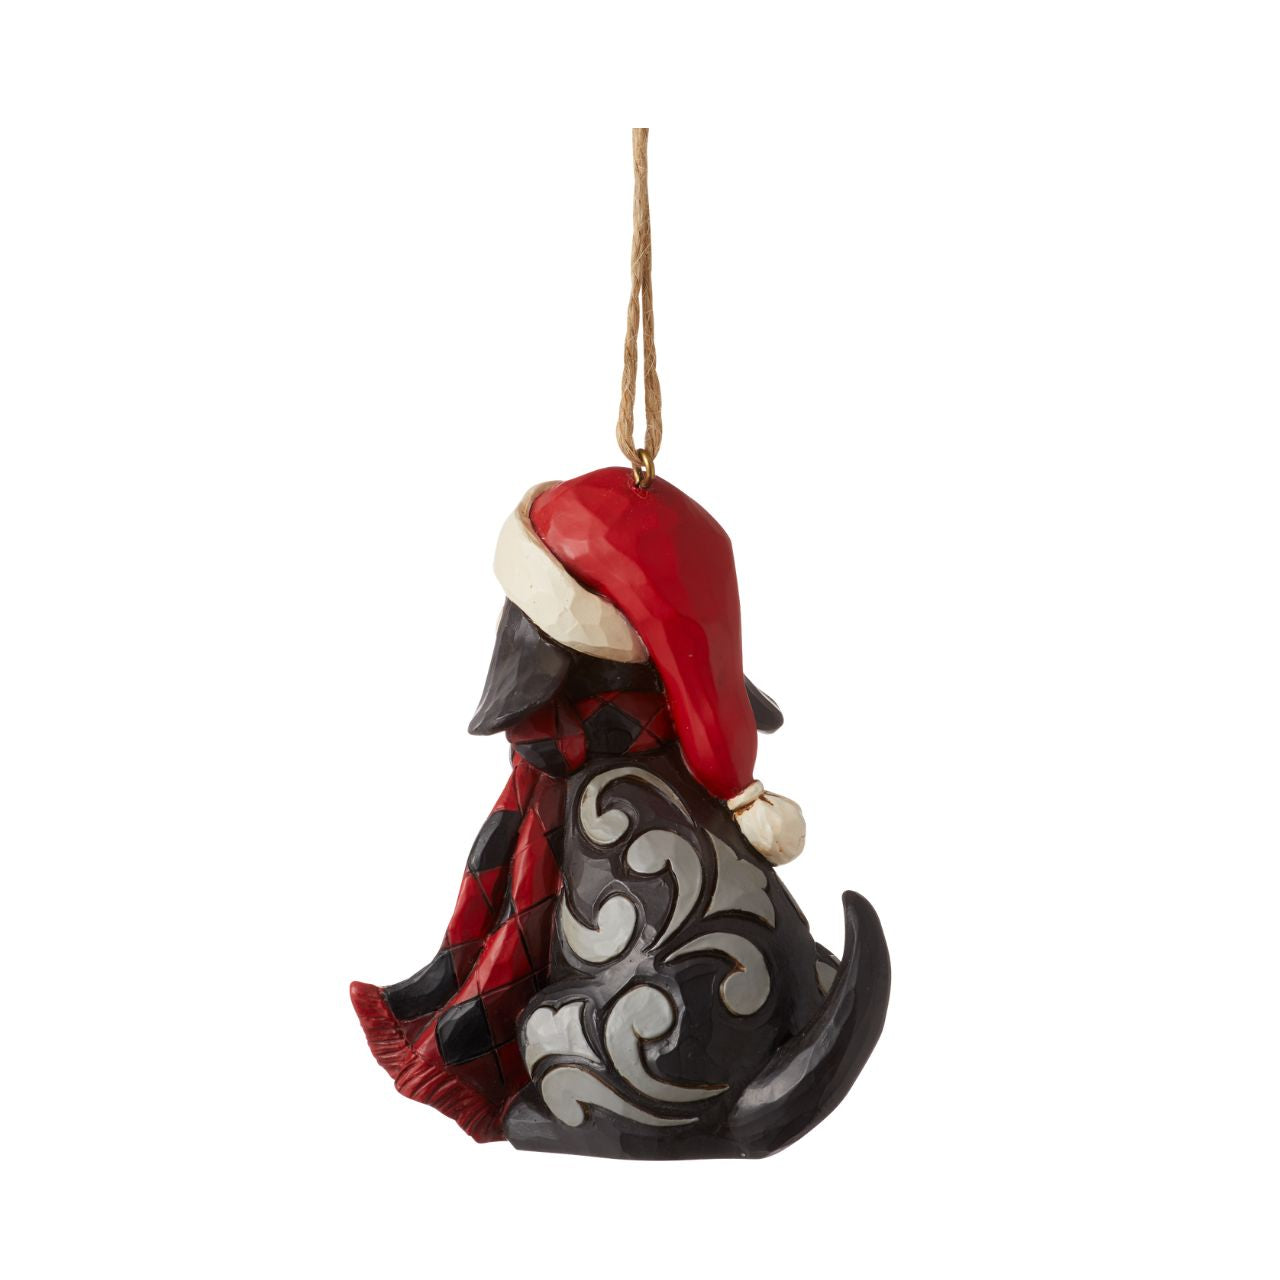 Heartwood Creek Highland Glen Dog in Scarf Hanging Ornament  Designed by award winning artist Jim Shore as part of the Heartwood Creek Highland Glen Collection, hand crafted using high quality cast stone and hand painted, this cute dog hanging ornament is perfect for the Christmas season.